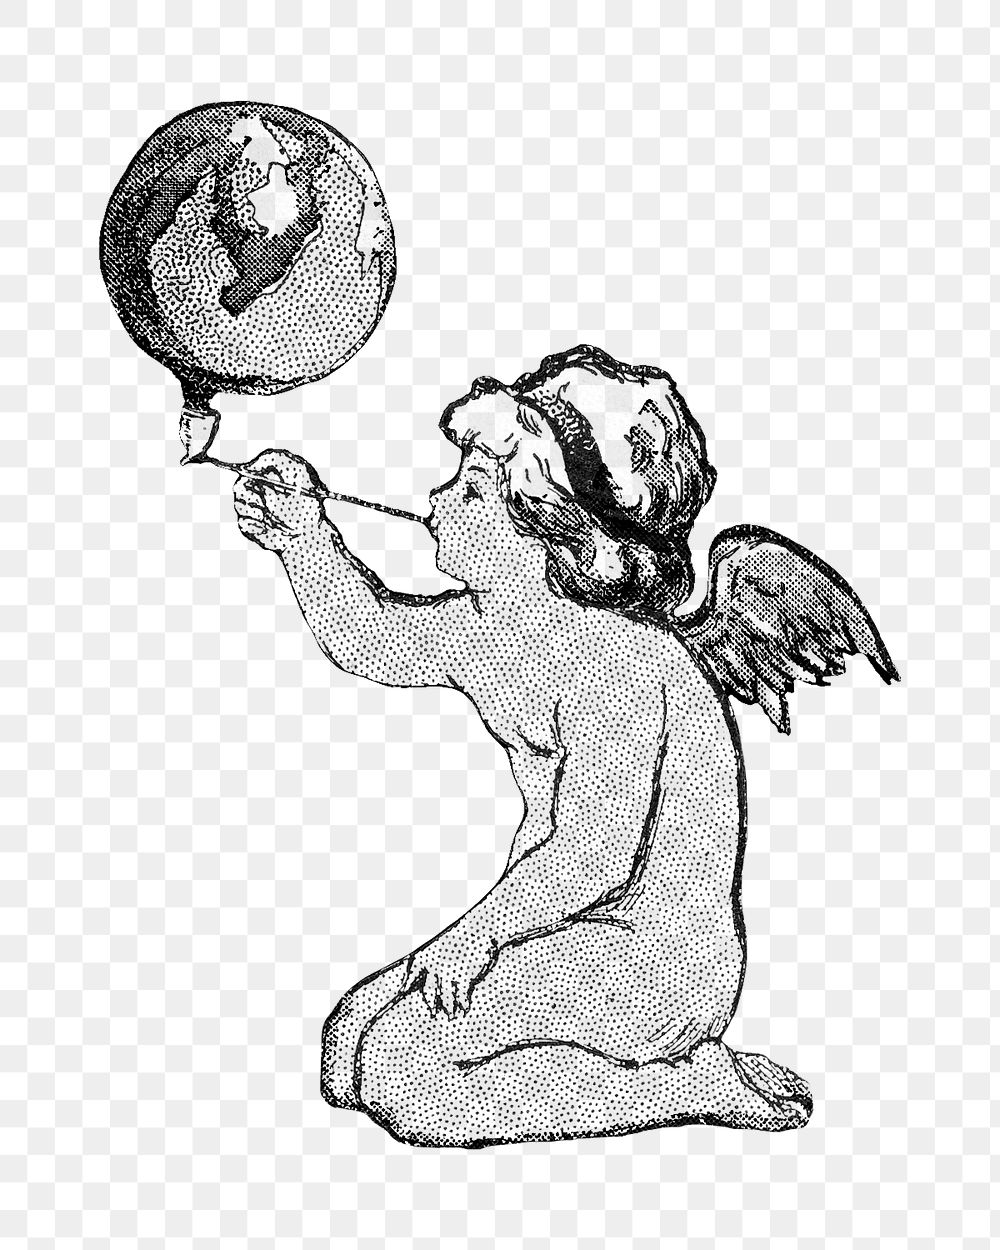 PNG Cupid blowing bubble, vintage illustration by Wells, Richardson & Co, transparent background.  Remixed by rawpixel. 